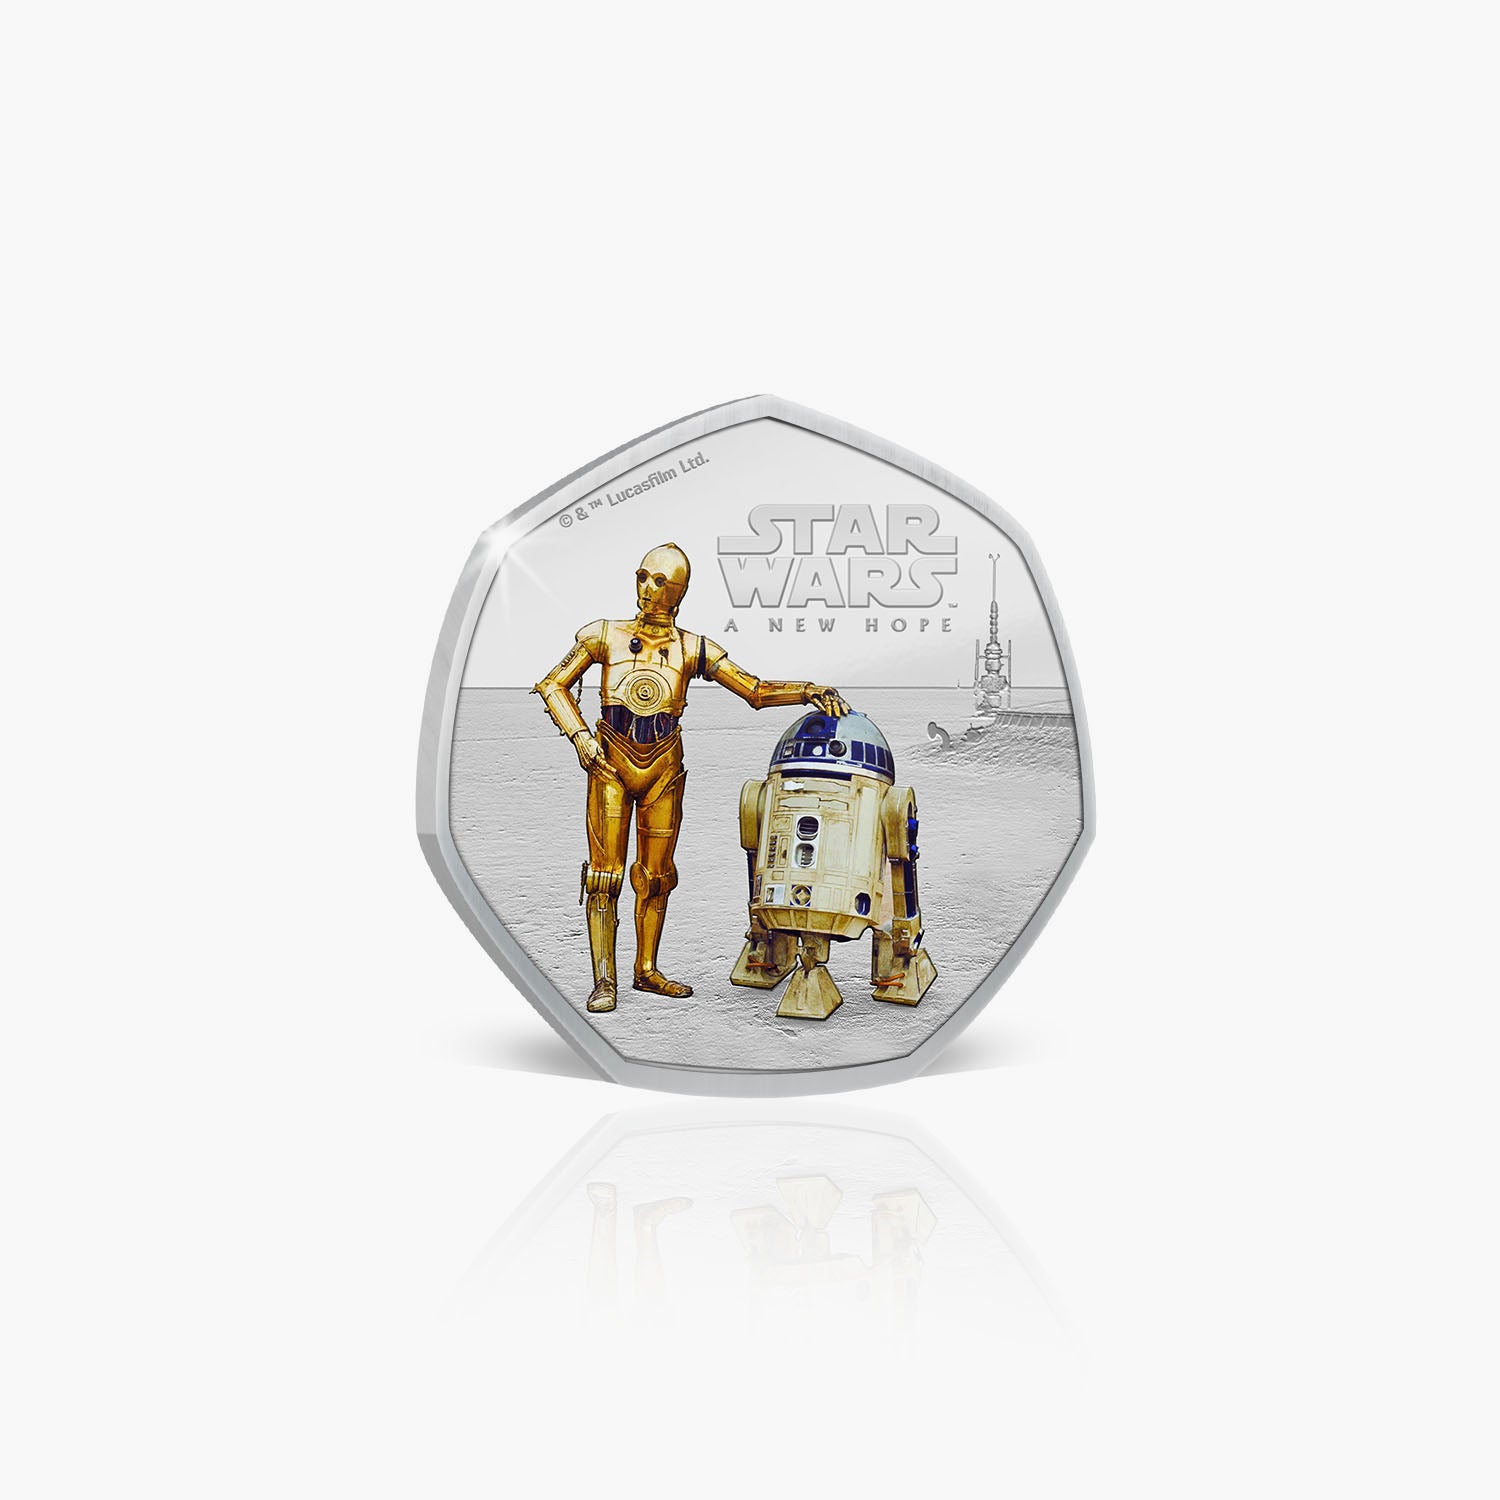 A New Hope - Droids For Sale Silver Plated Coin